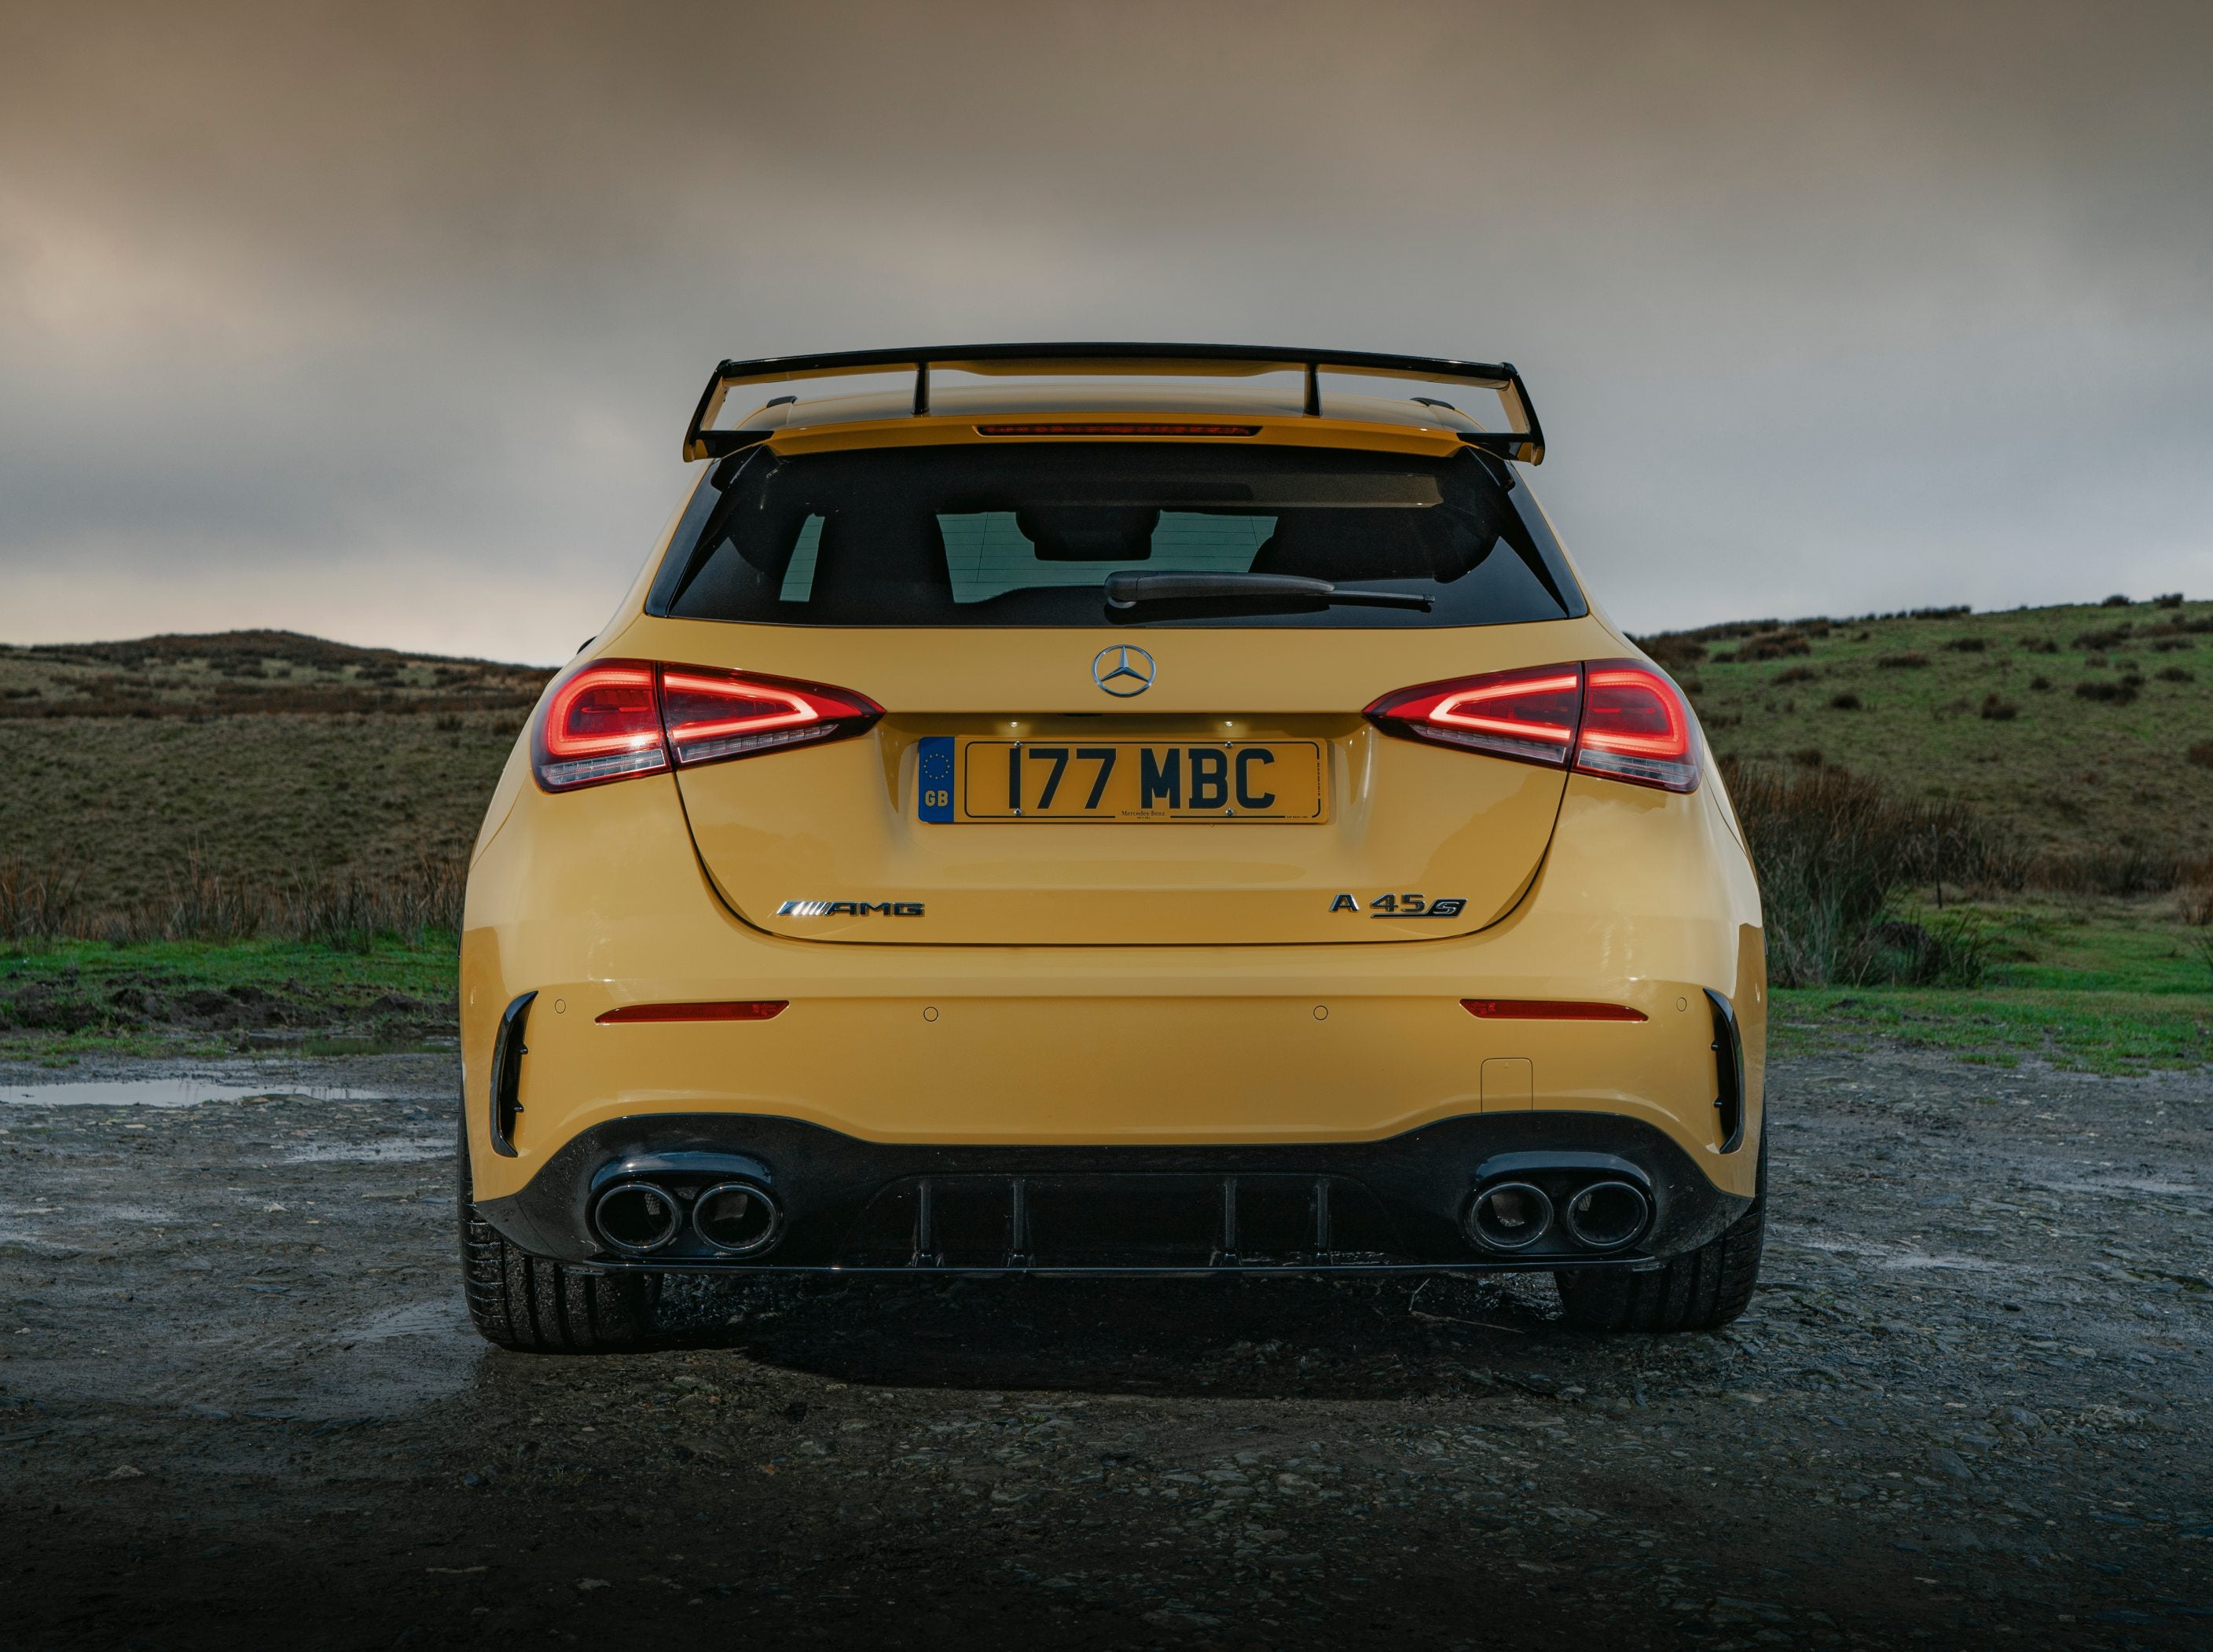 Quad exhausts prove you haven't 'skimped' with the A35 model